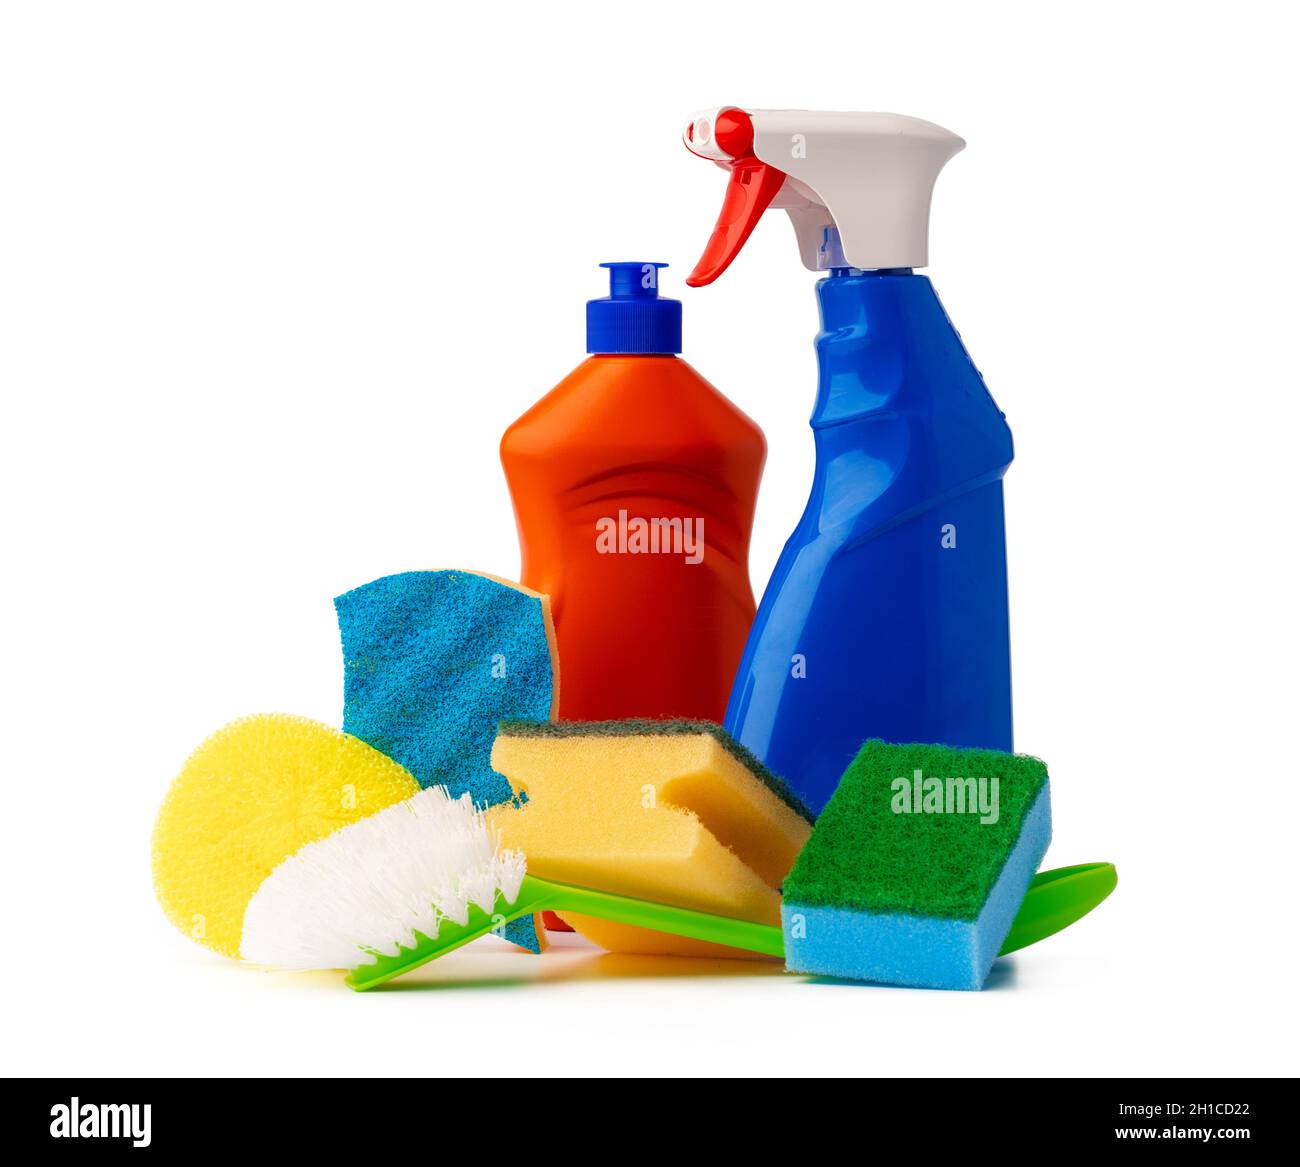 https://c8.alamy.com/comp/2H1CD22/sanitary-household-cleaning-items-isolated-on-white-background-2H1CD22.jpg